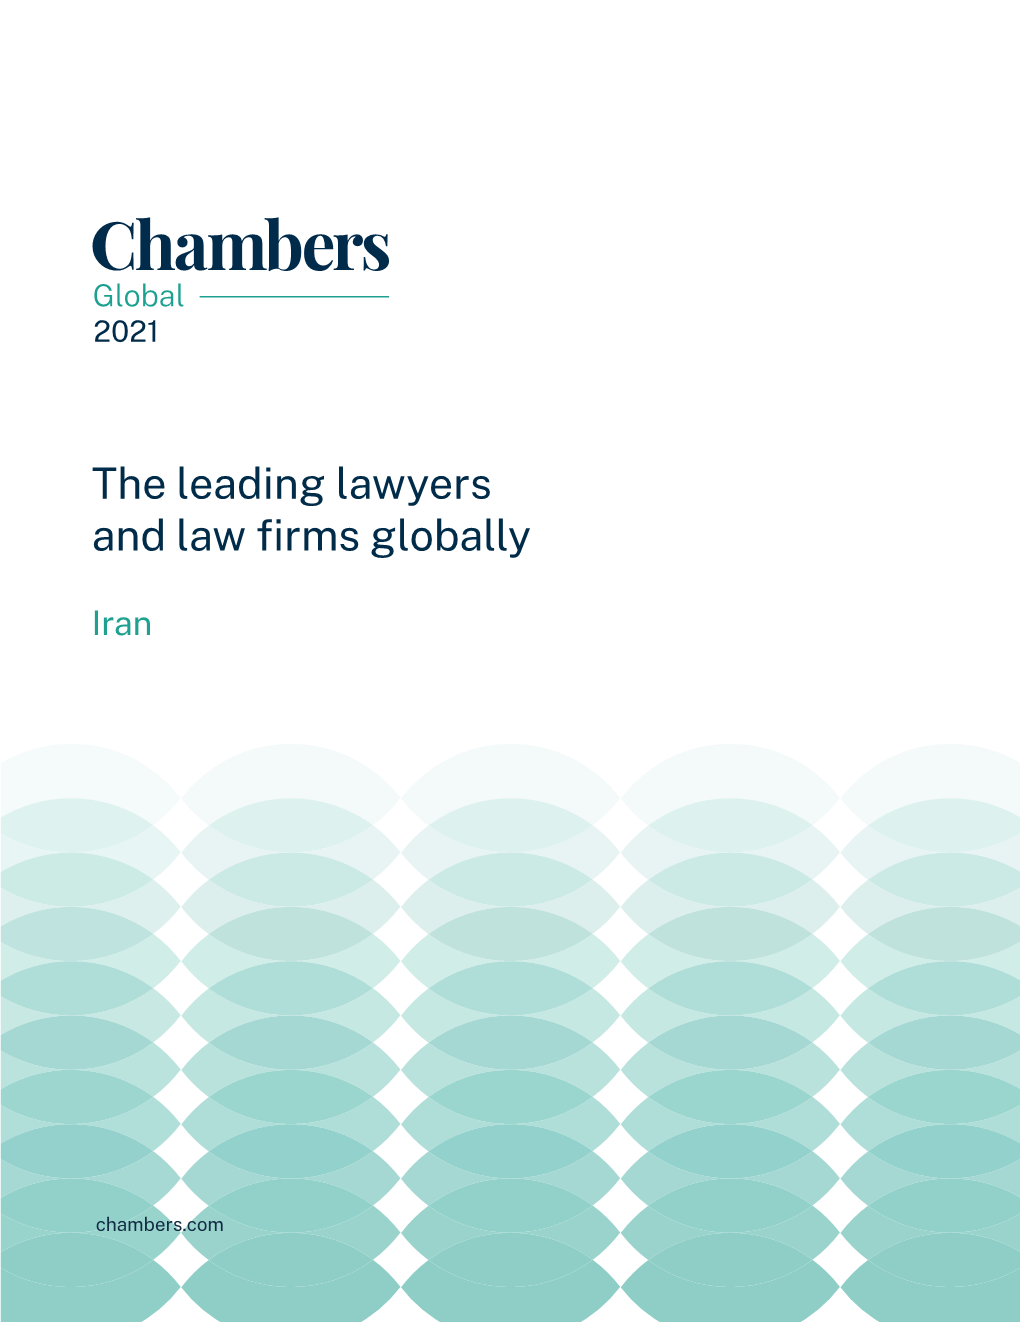 The Leading Lawyers and Law Firms Globally